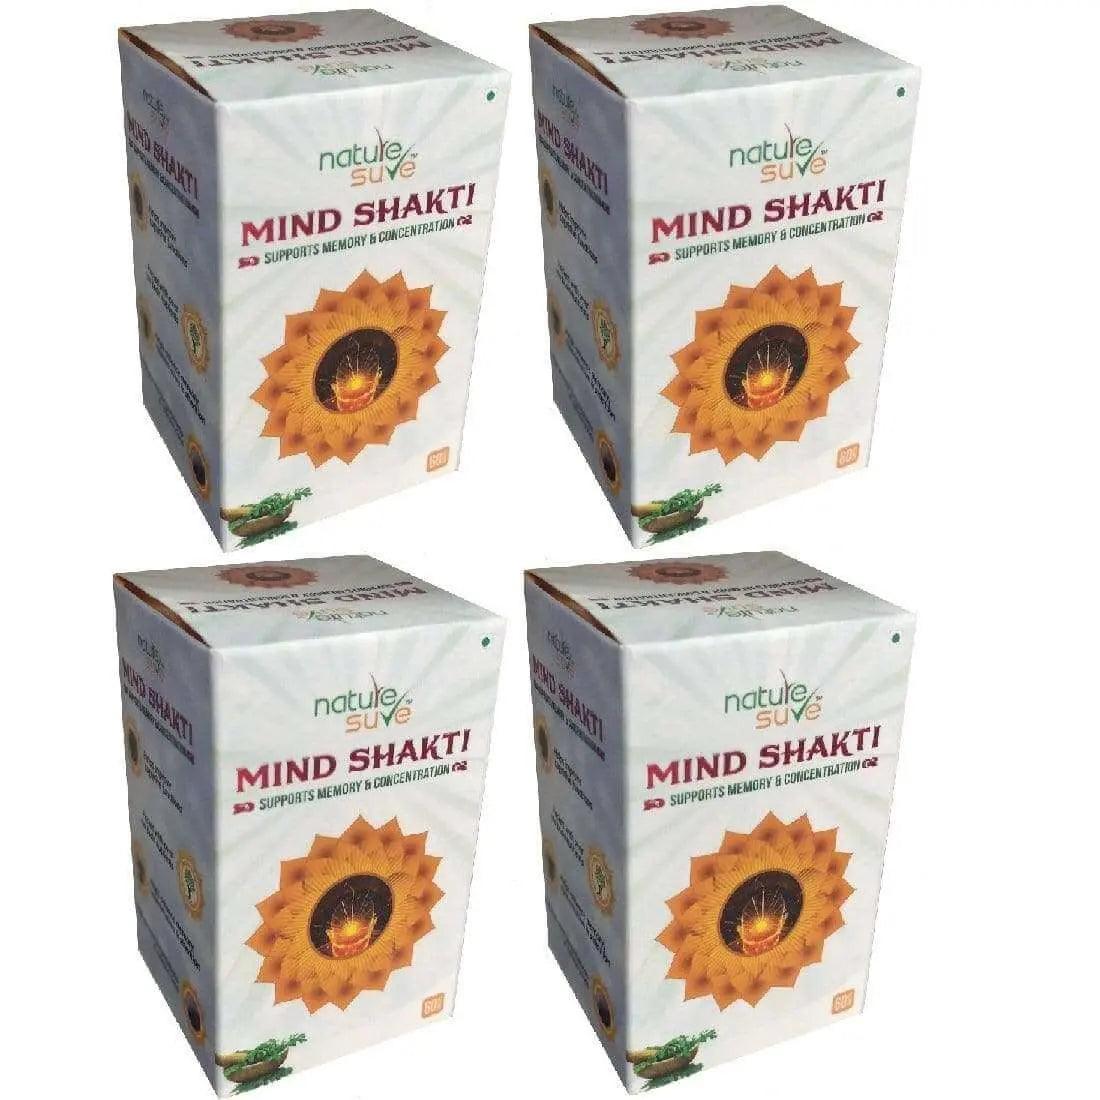 Nature Sure Mind Shakti Tablets for Memory and Concentration in Men & Women - 60 Tablets 8903540009392